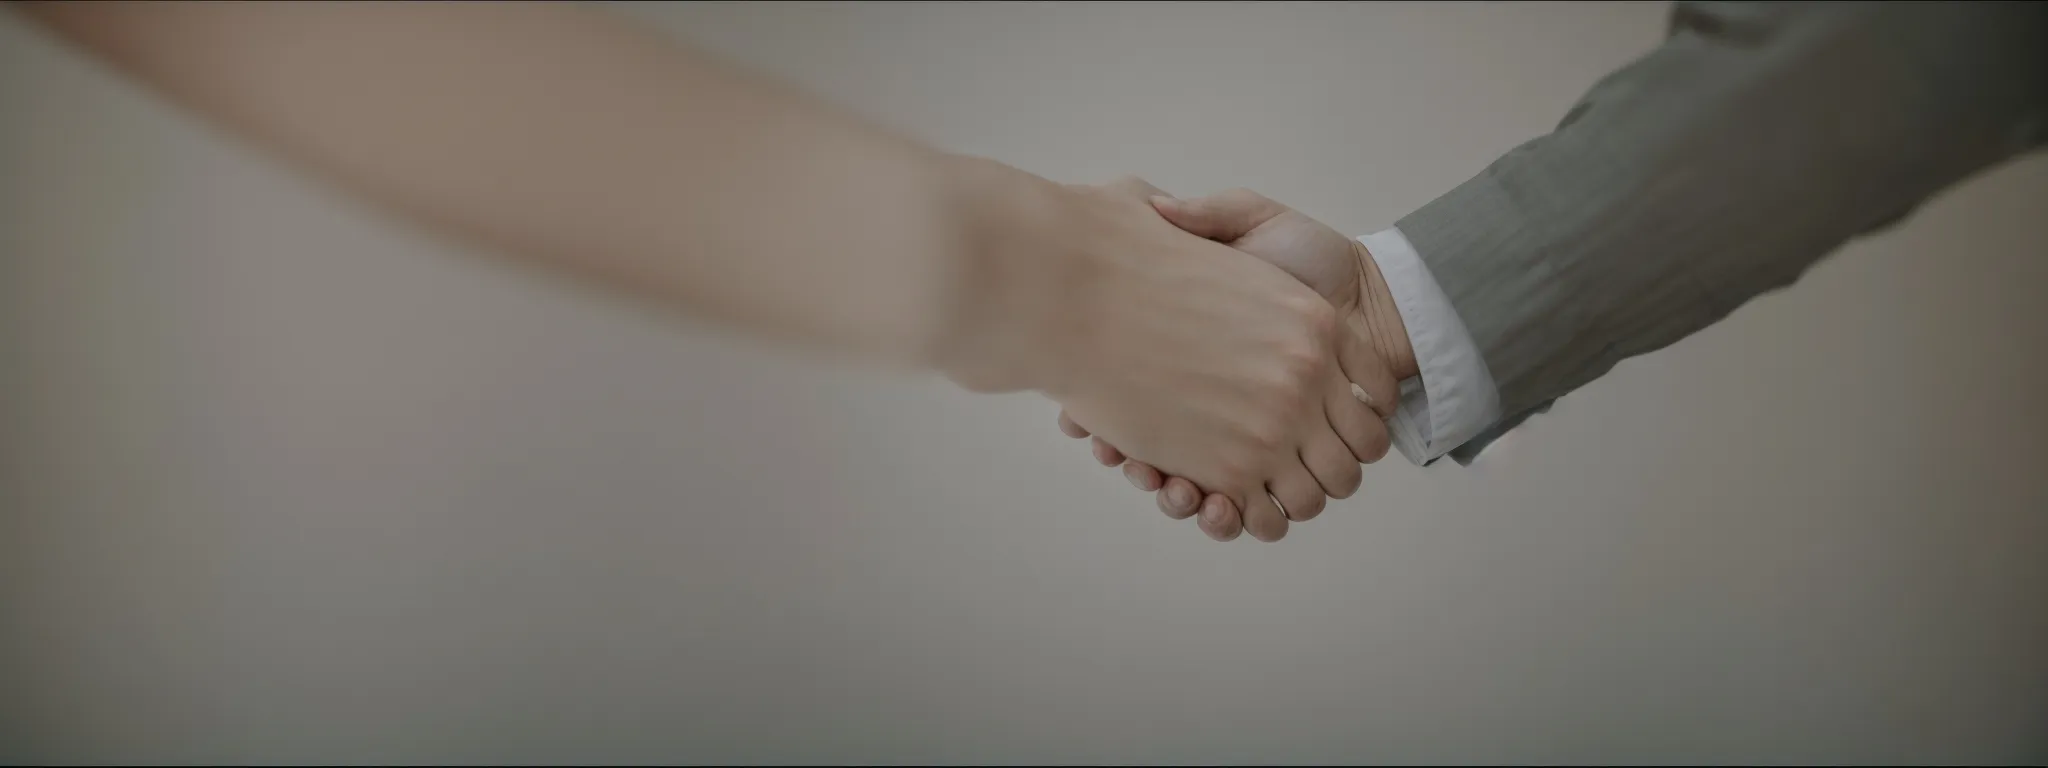 a professional handshake against a neutral background, symbolizing a successful personalized business partnership.